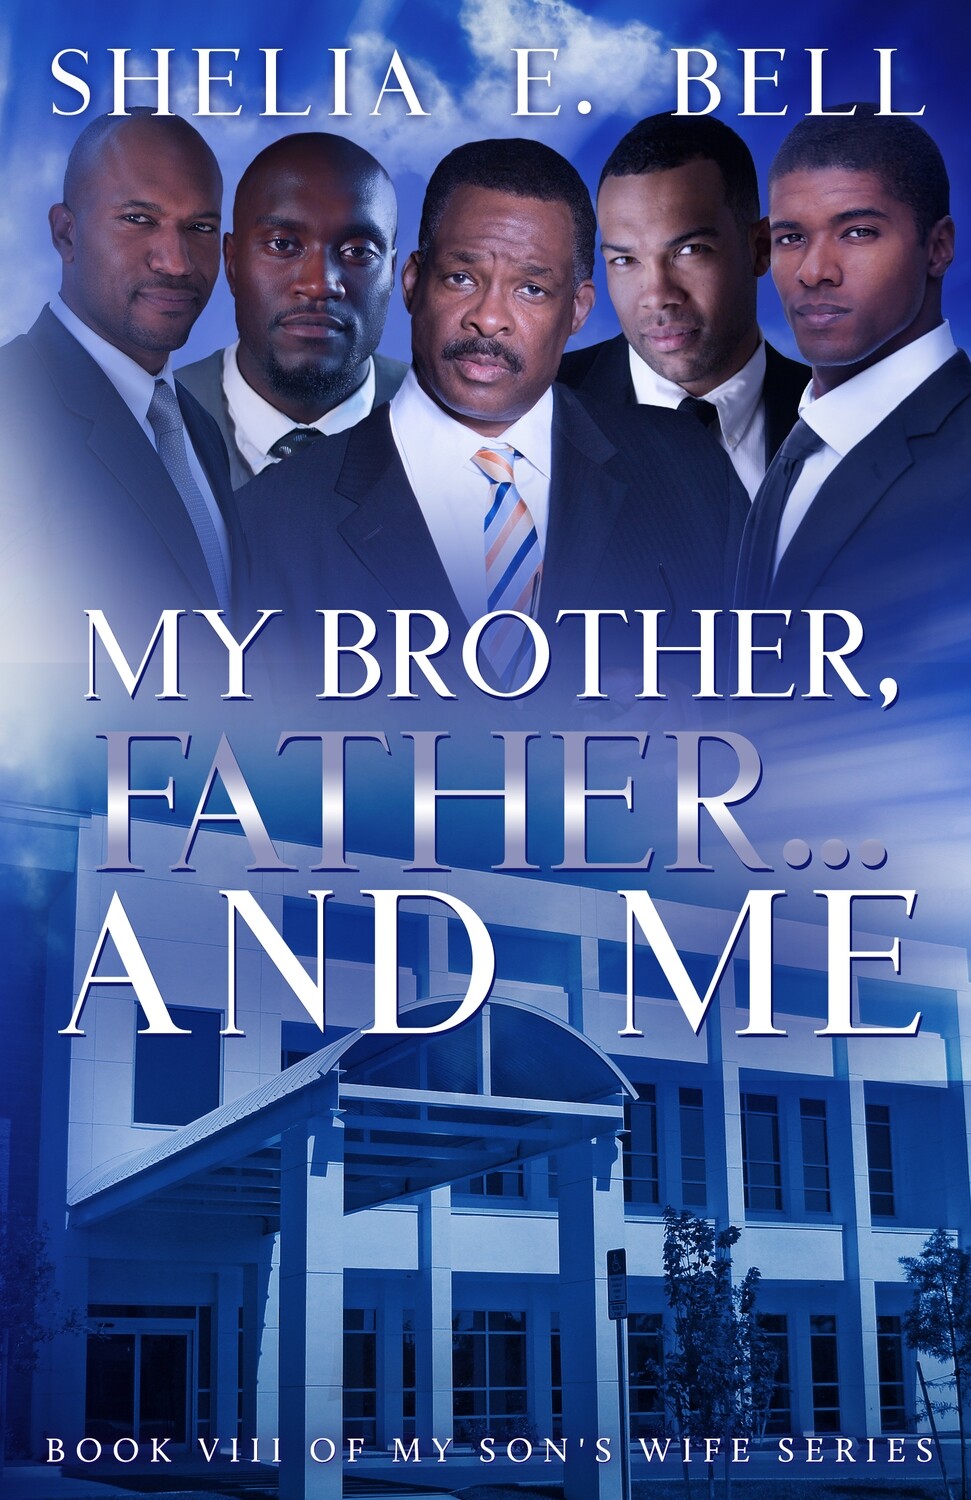 MY BROTHER FATHER AND ME (MSW Book 8)